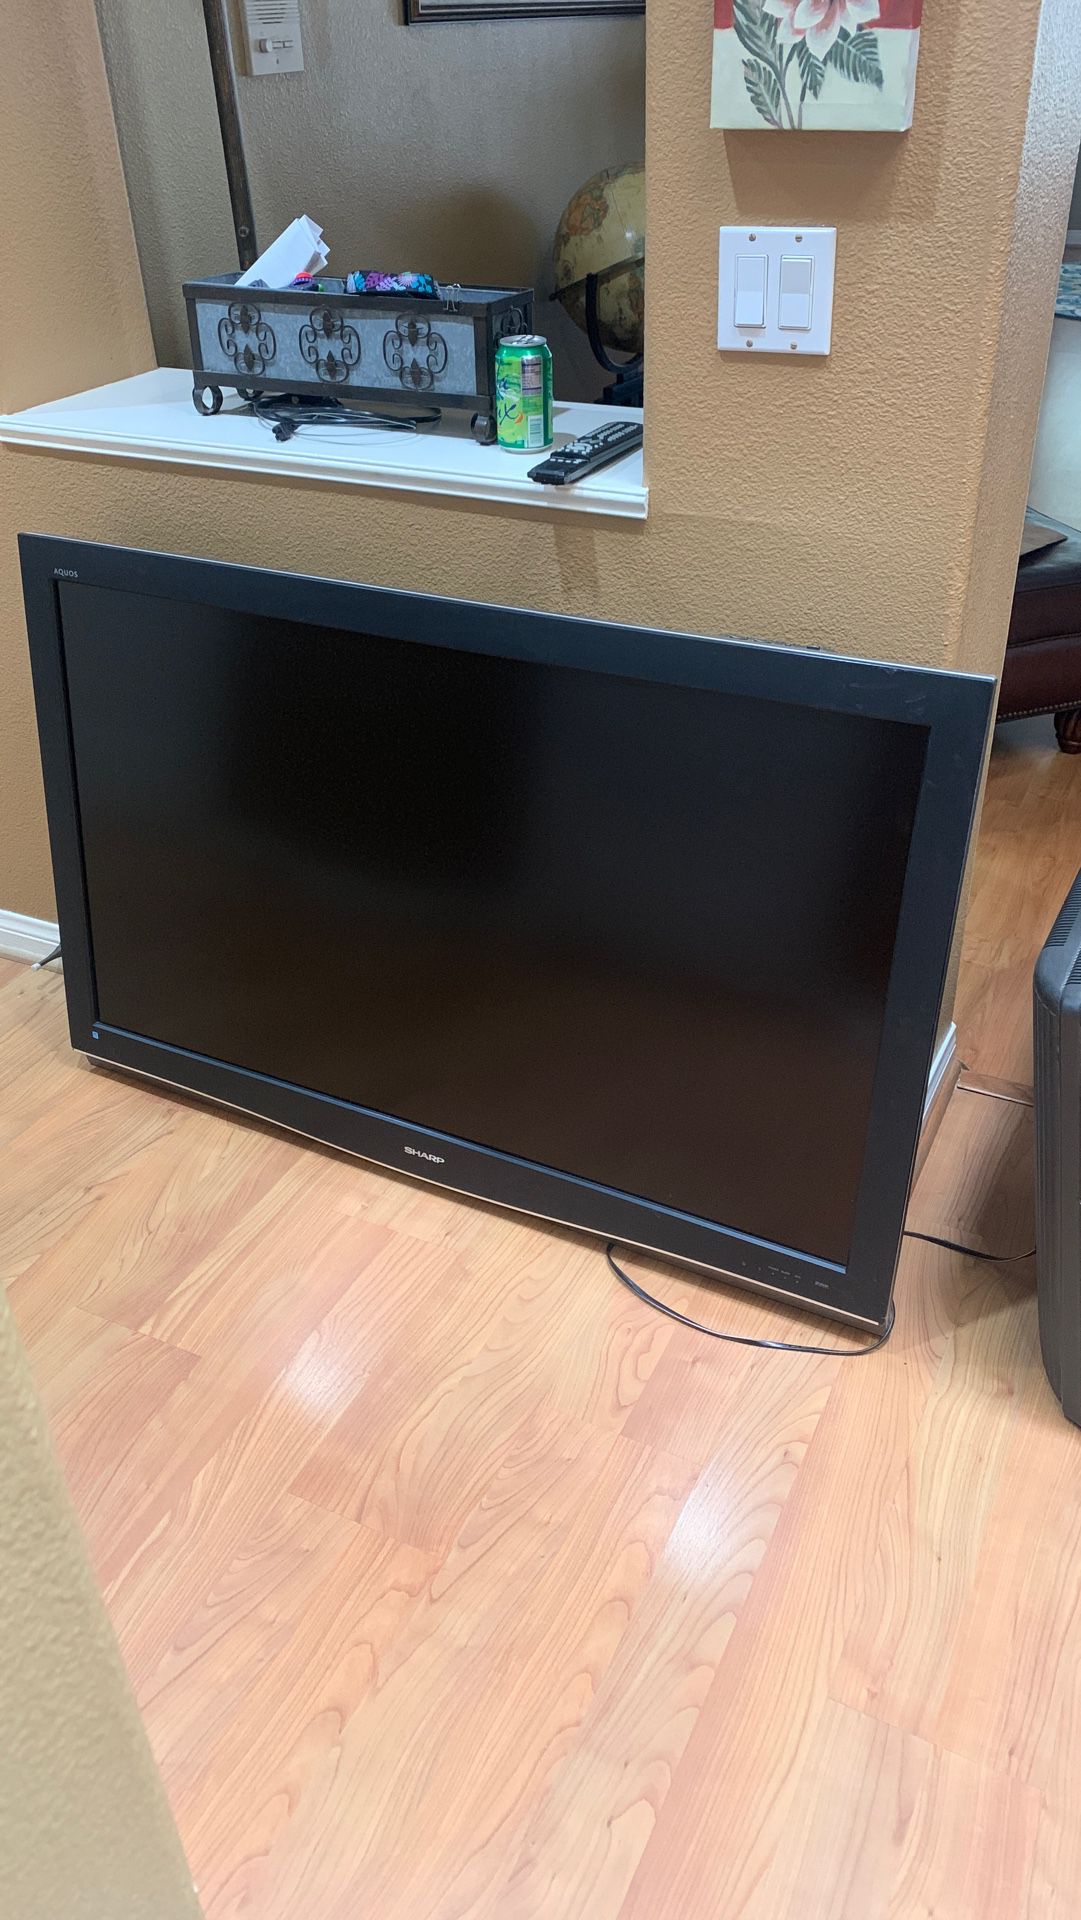 SHARP AQUOS HD TVS FOR SALE 65 INCH/32 INCH